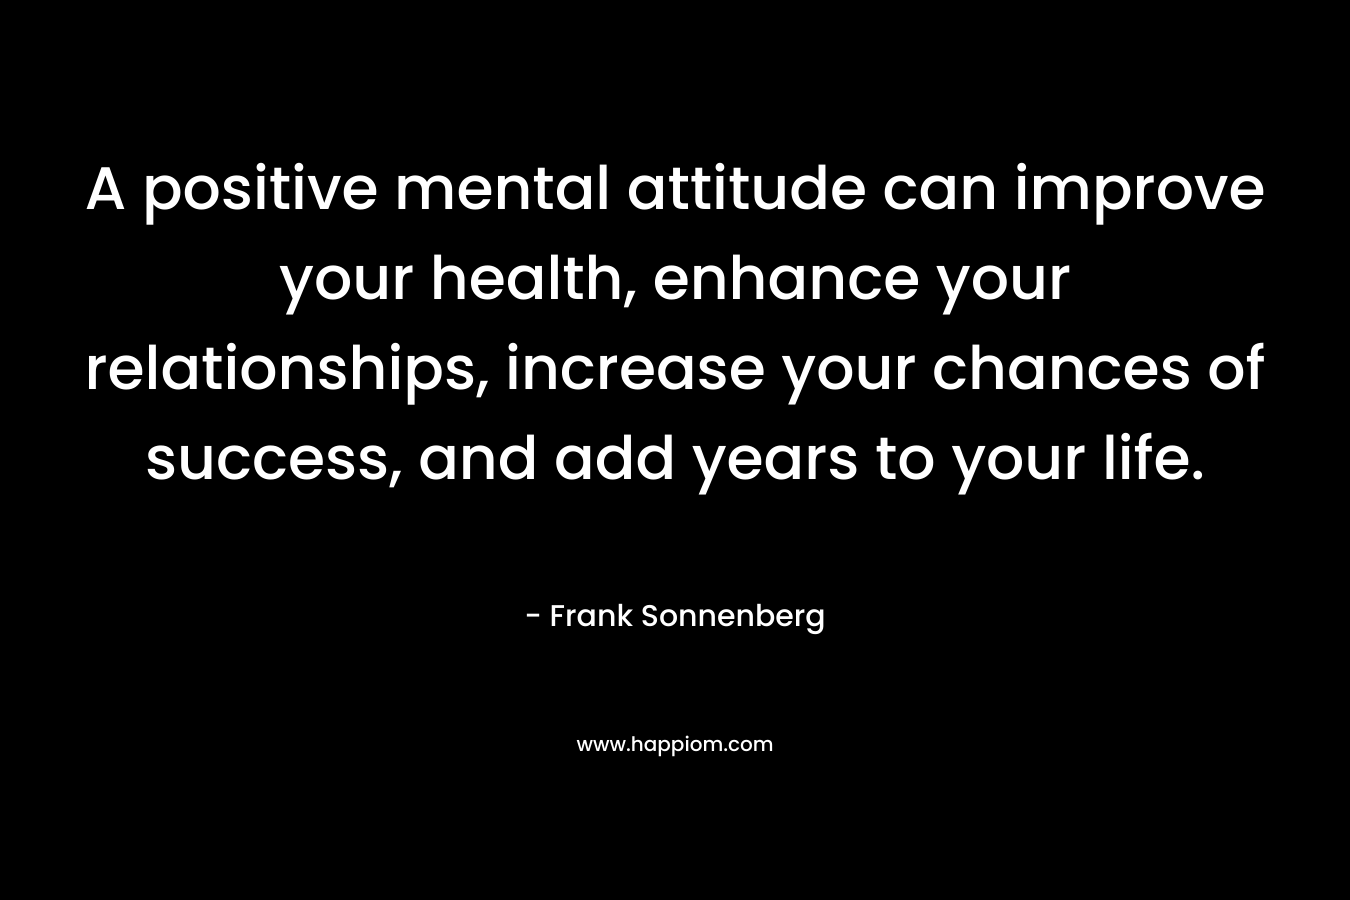 A positive mental attitude can improve your health, enhance your relationships, increase your chances of success, and add years to your life.